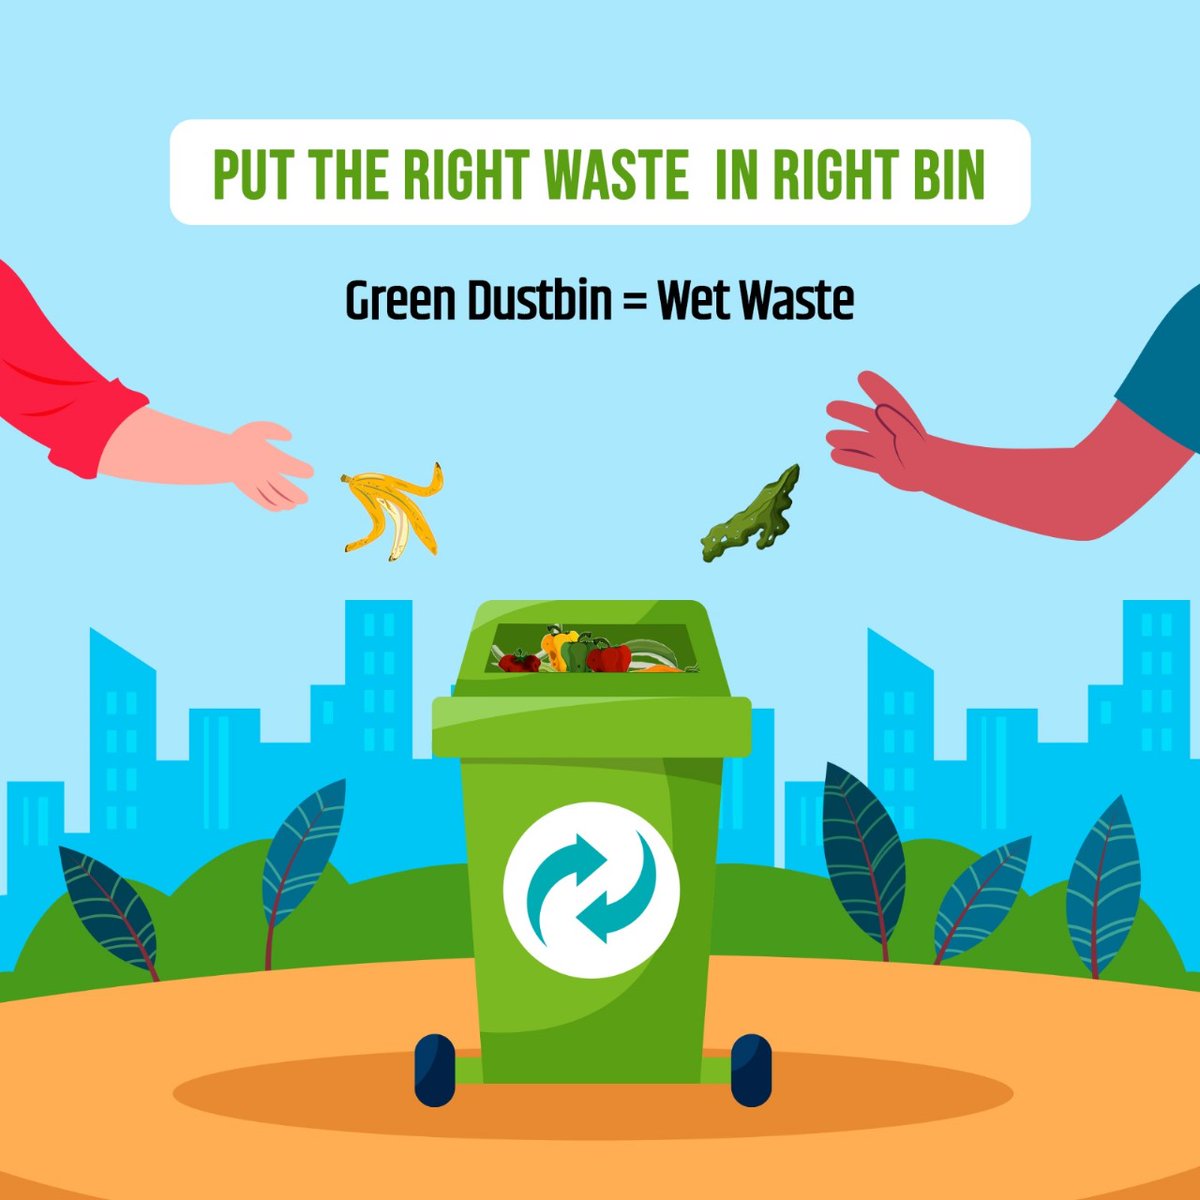 Do you Know? What goes in the Green Dustbin? Green Dustbin - Wet waste & organic materials. By separating your waste & depositing it into the green bin, you not only keep your surroundings clean but also contribute to a greener, more sustainable environment. #GarbageFreeCities